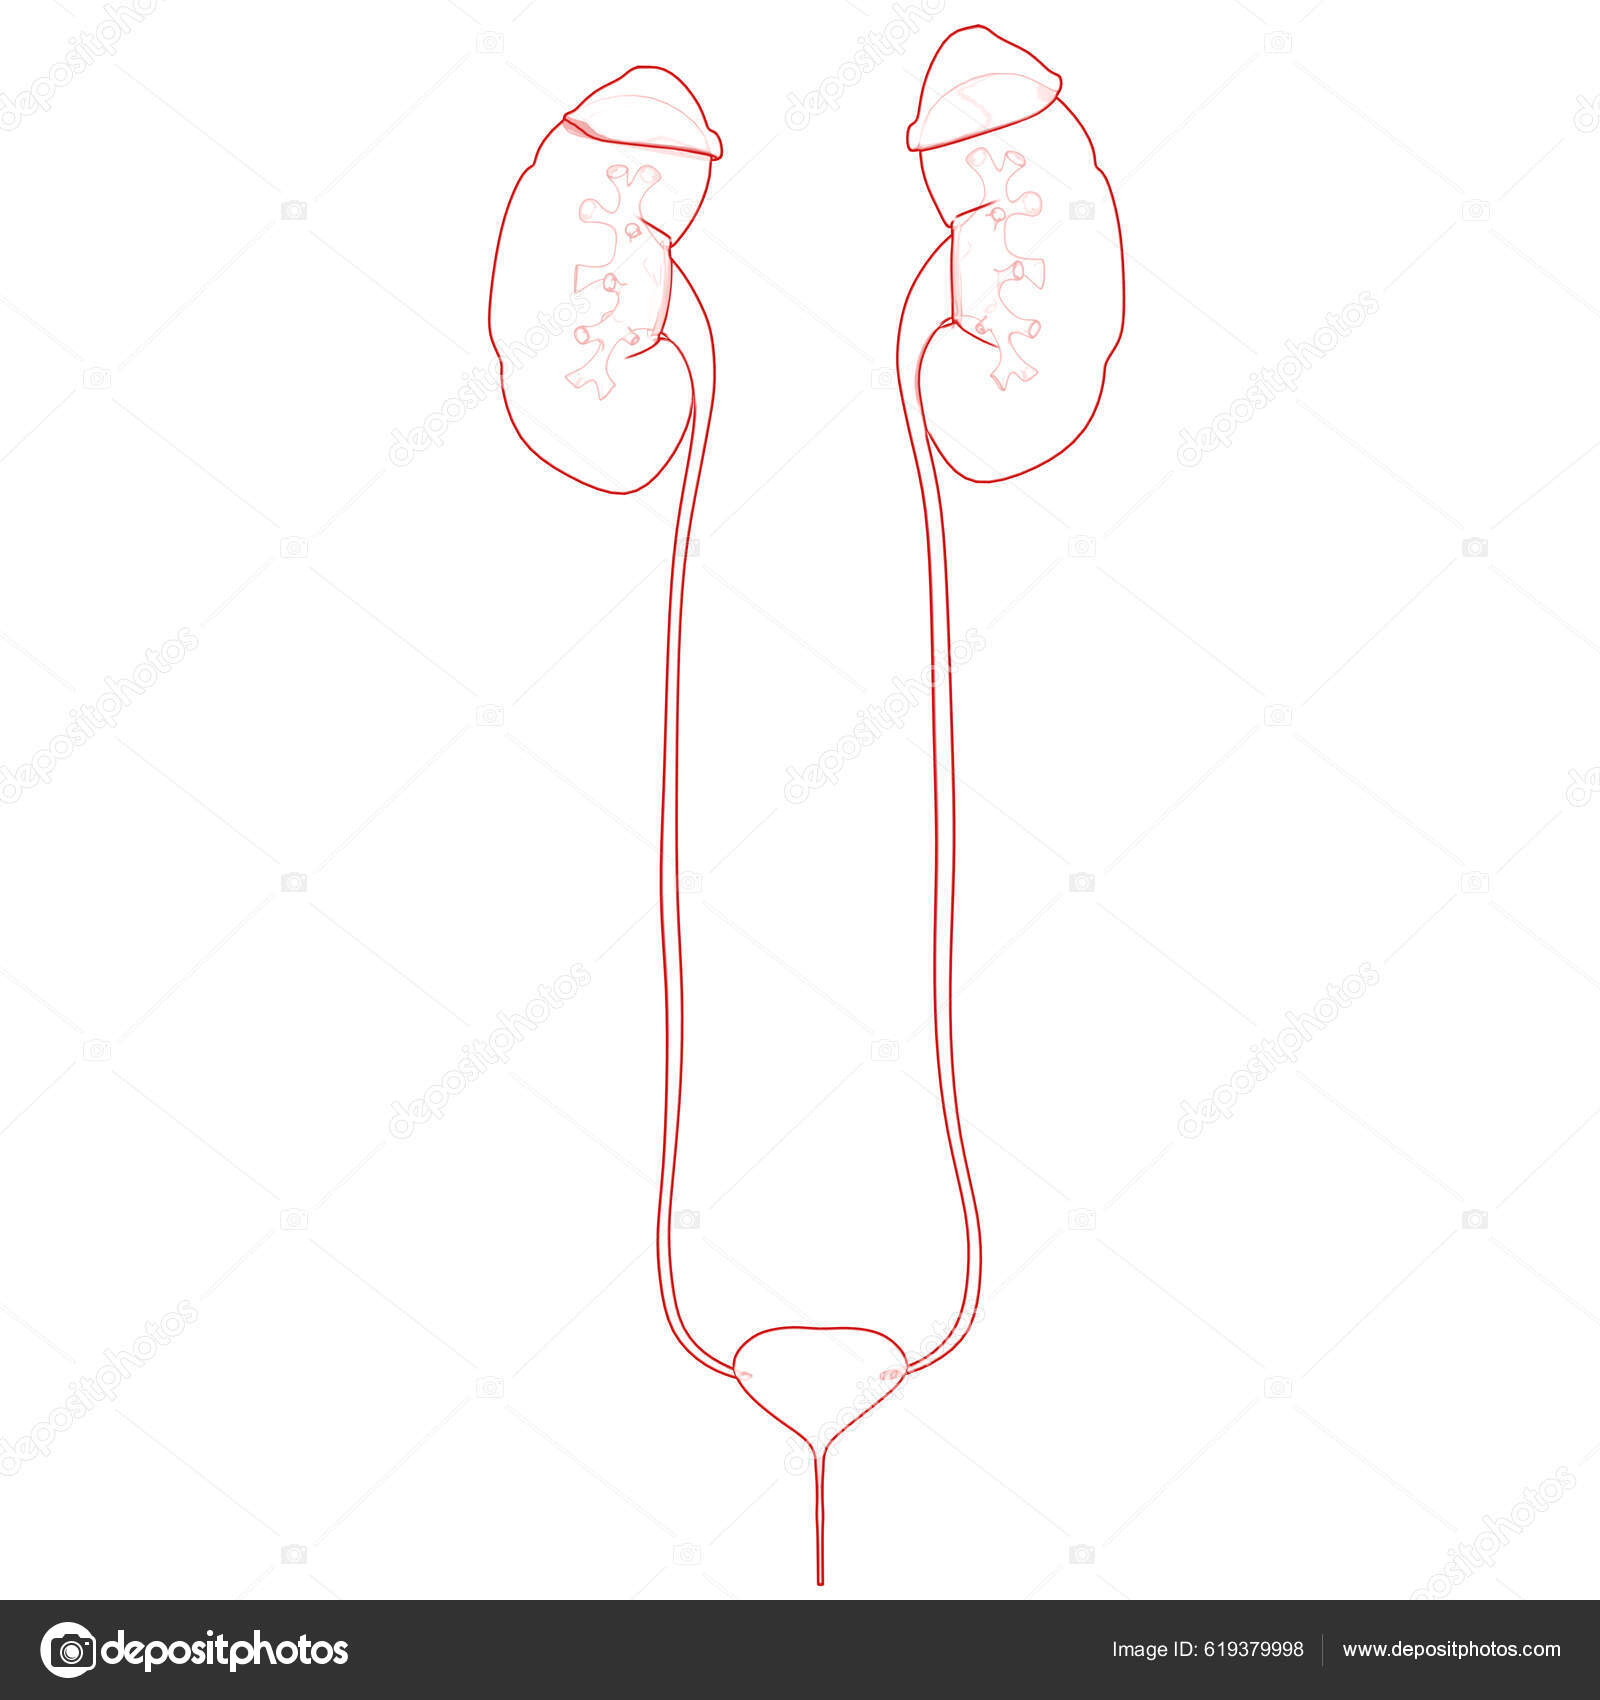 Genitourinary System, Male, Anatomy: Image Details - NCI Visuals Online